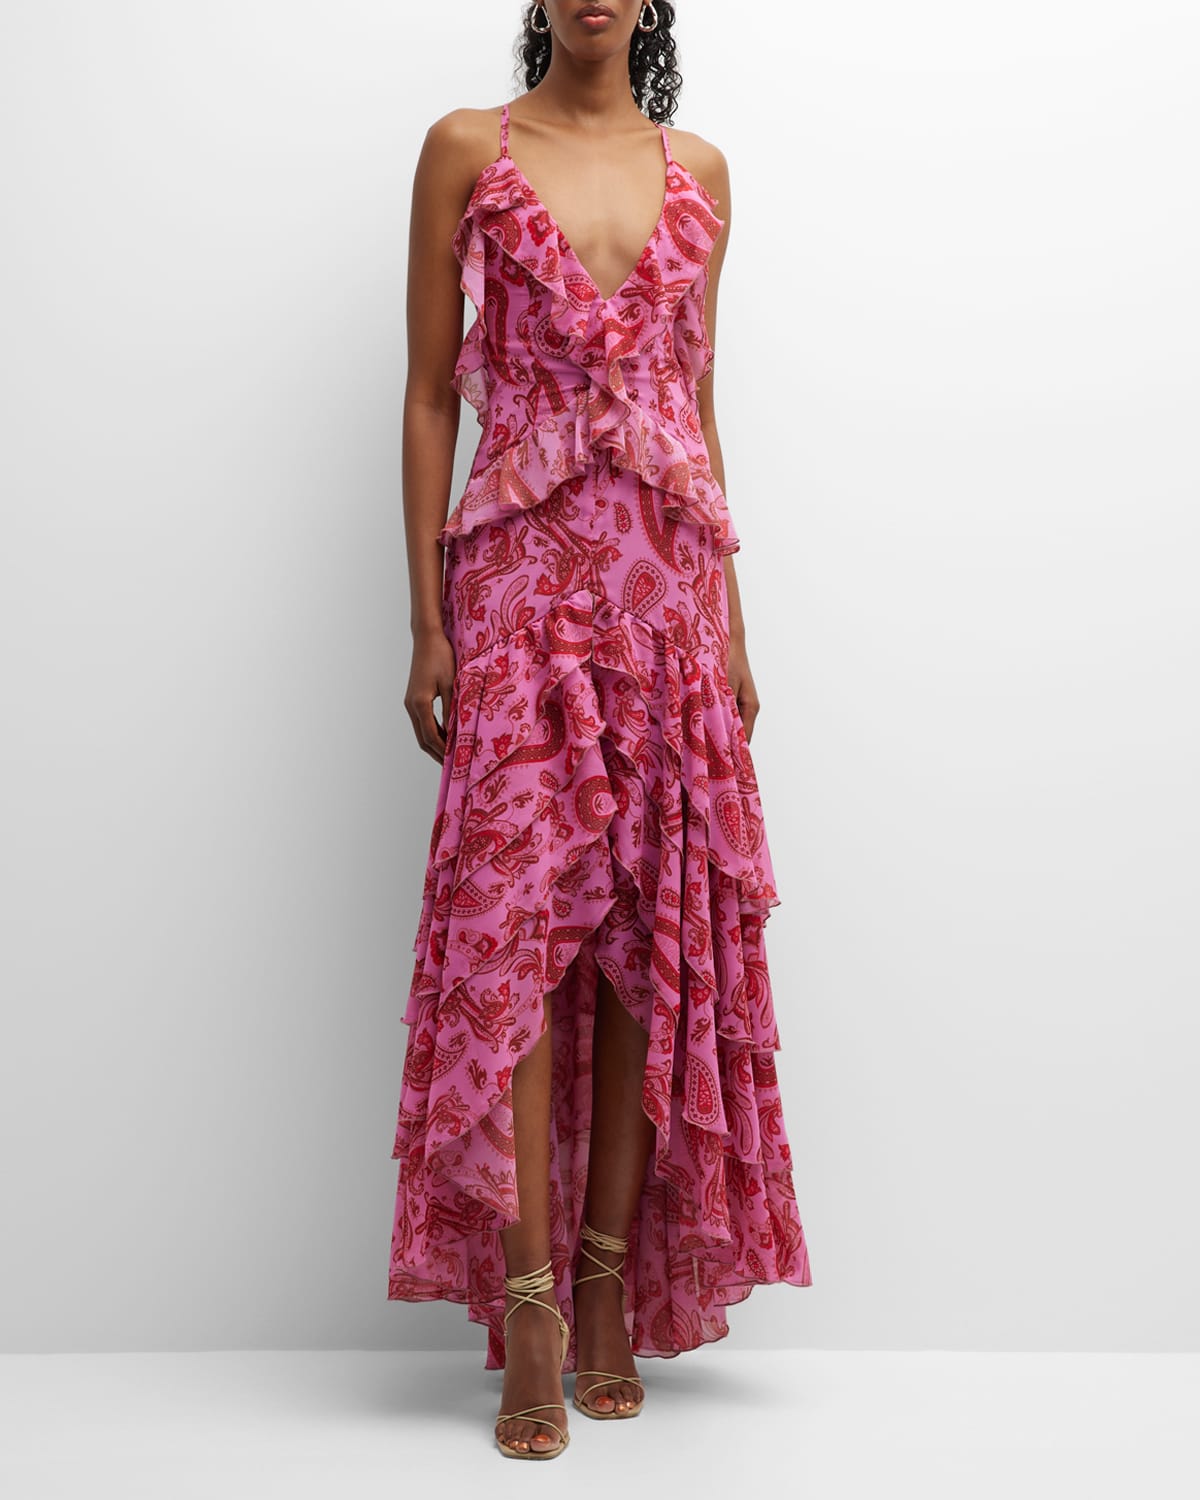 LACE The Label Ruffle-Trim Paisley-Print High-Low Maxi Dress